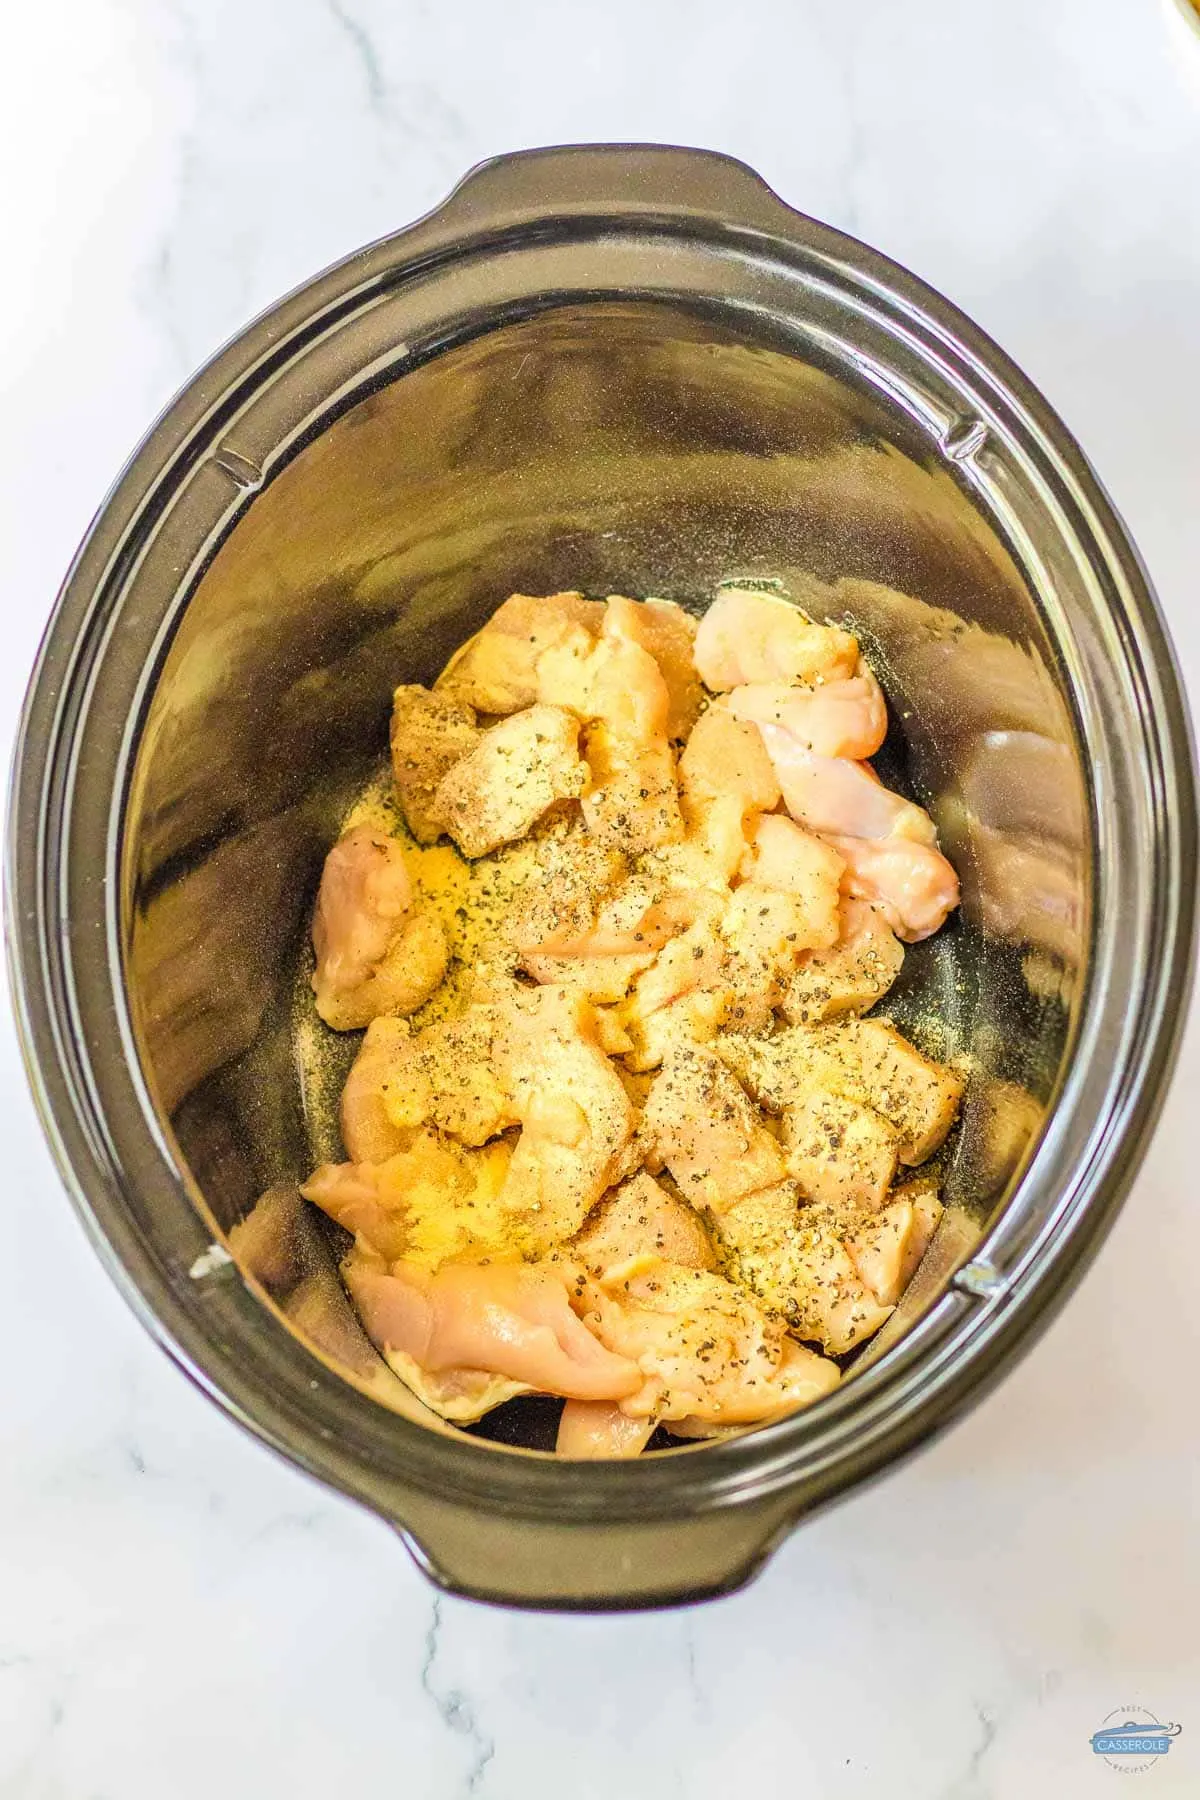 diced chicken and spices in a slow cooker bowl